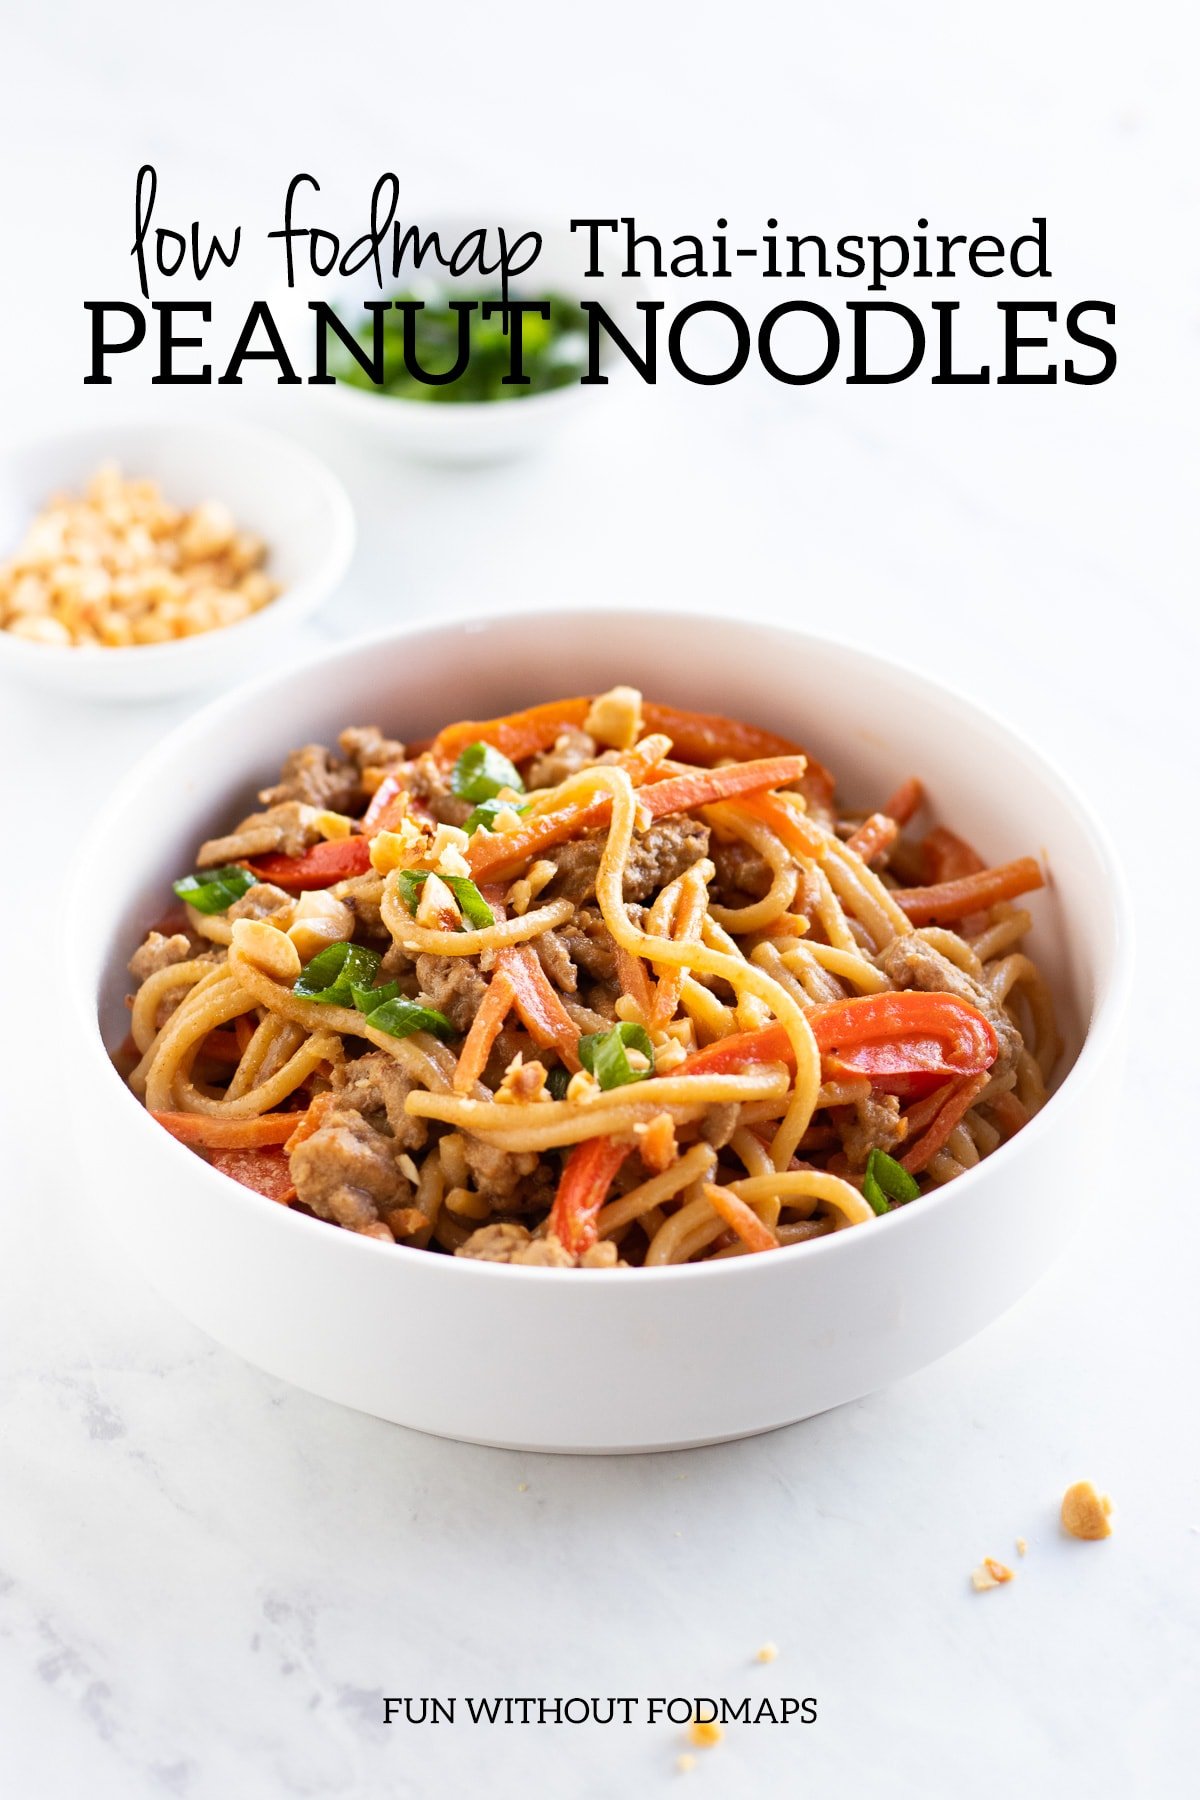 A bowl of spaghetti noodles tossed in a peanut sauce with sauteed red bell pepper slices, carrot matchsticks, and ground turkey. Above, a black text overlay reads "Low FODMAP Thai-inspired Peanut Noodles."